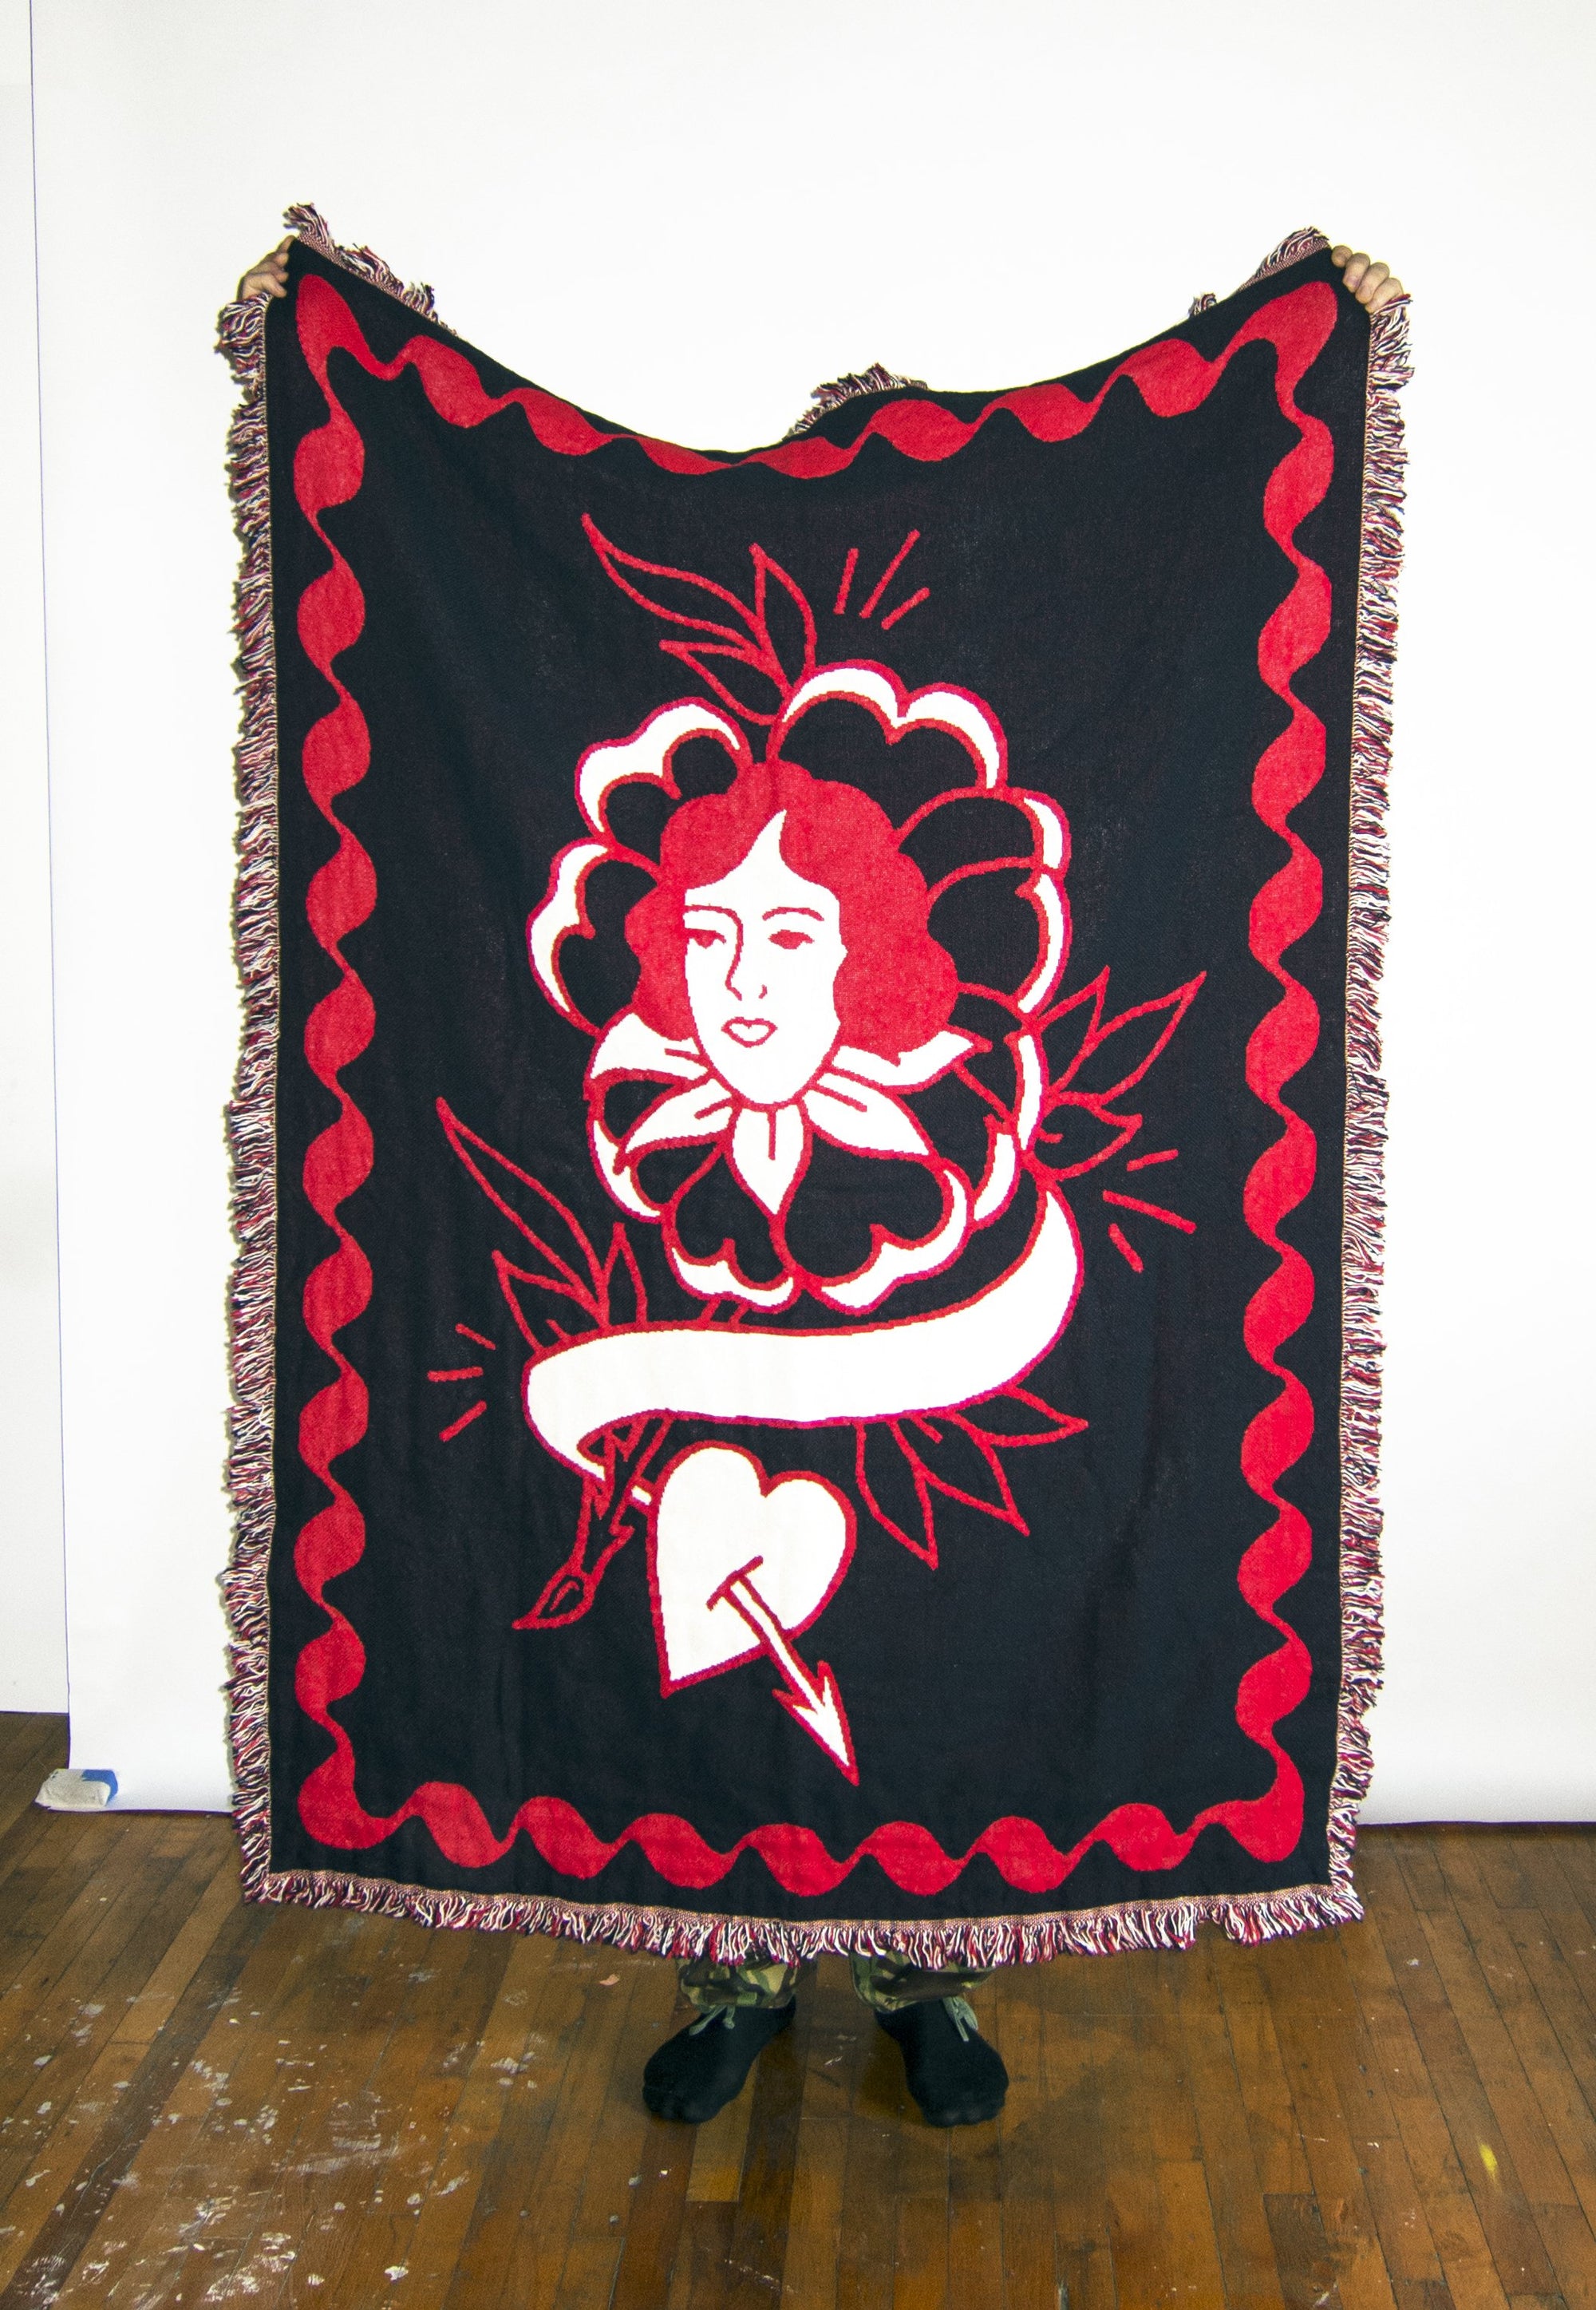 No Fun Press "Rose" woven blanket. Woven from 100% cotton in red, white, and black, at 48" x 68." Pictured here being held up beside a person to show scale